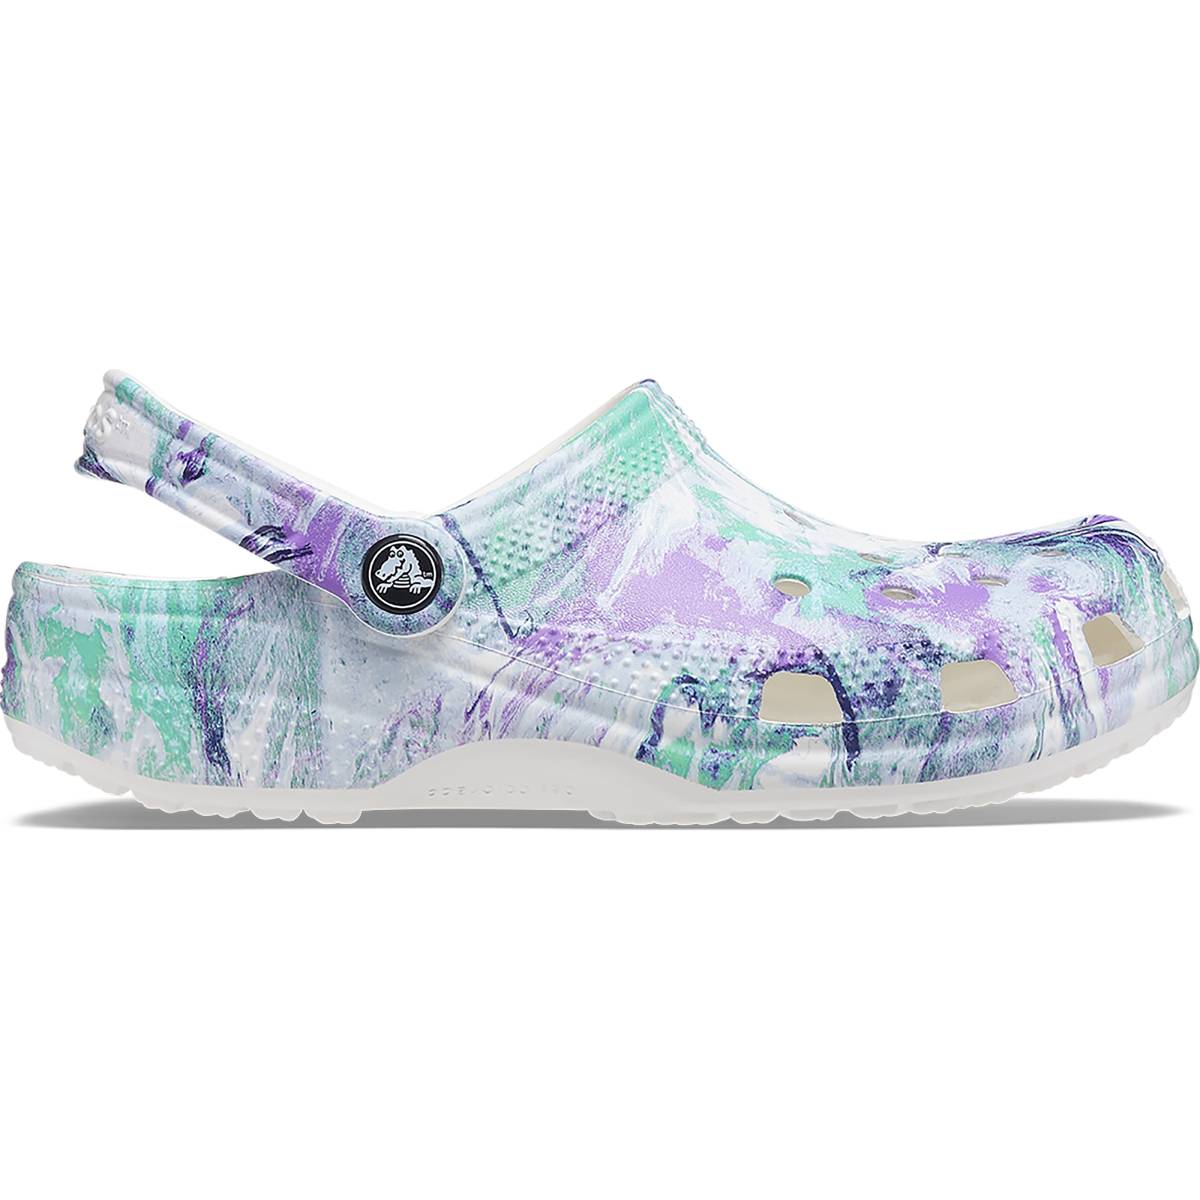 Classic Out of this WorldII Cg - White/Multi